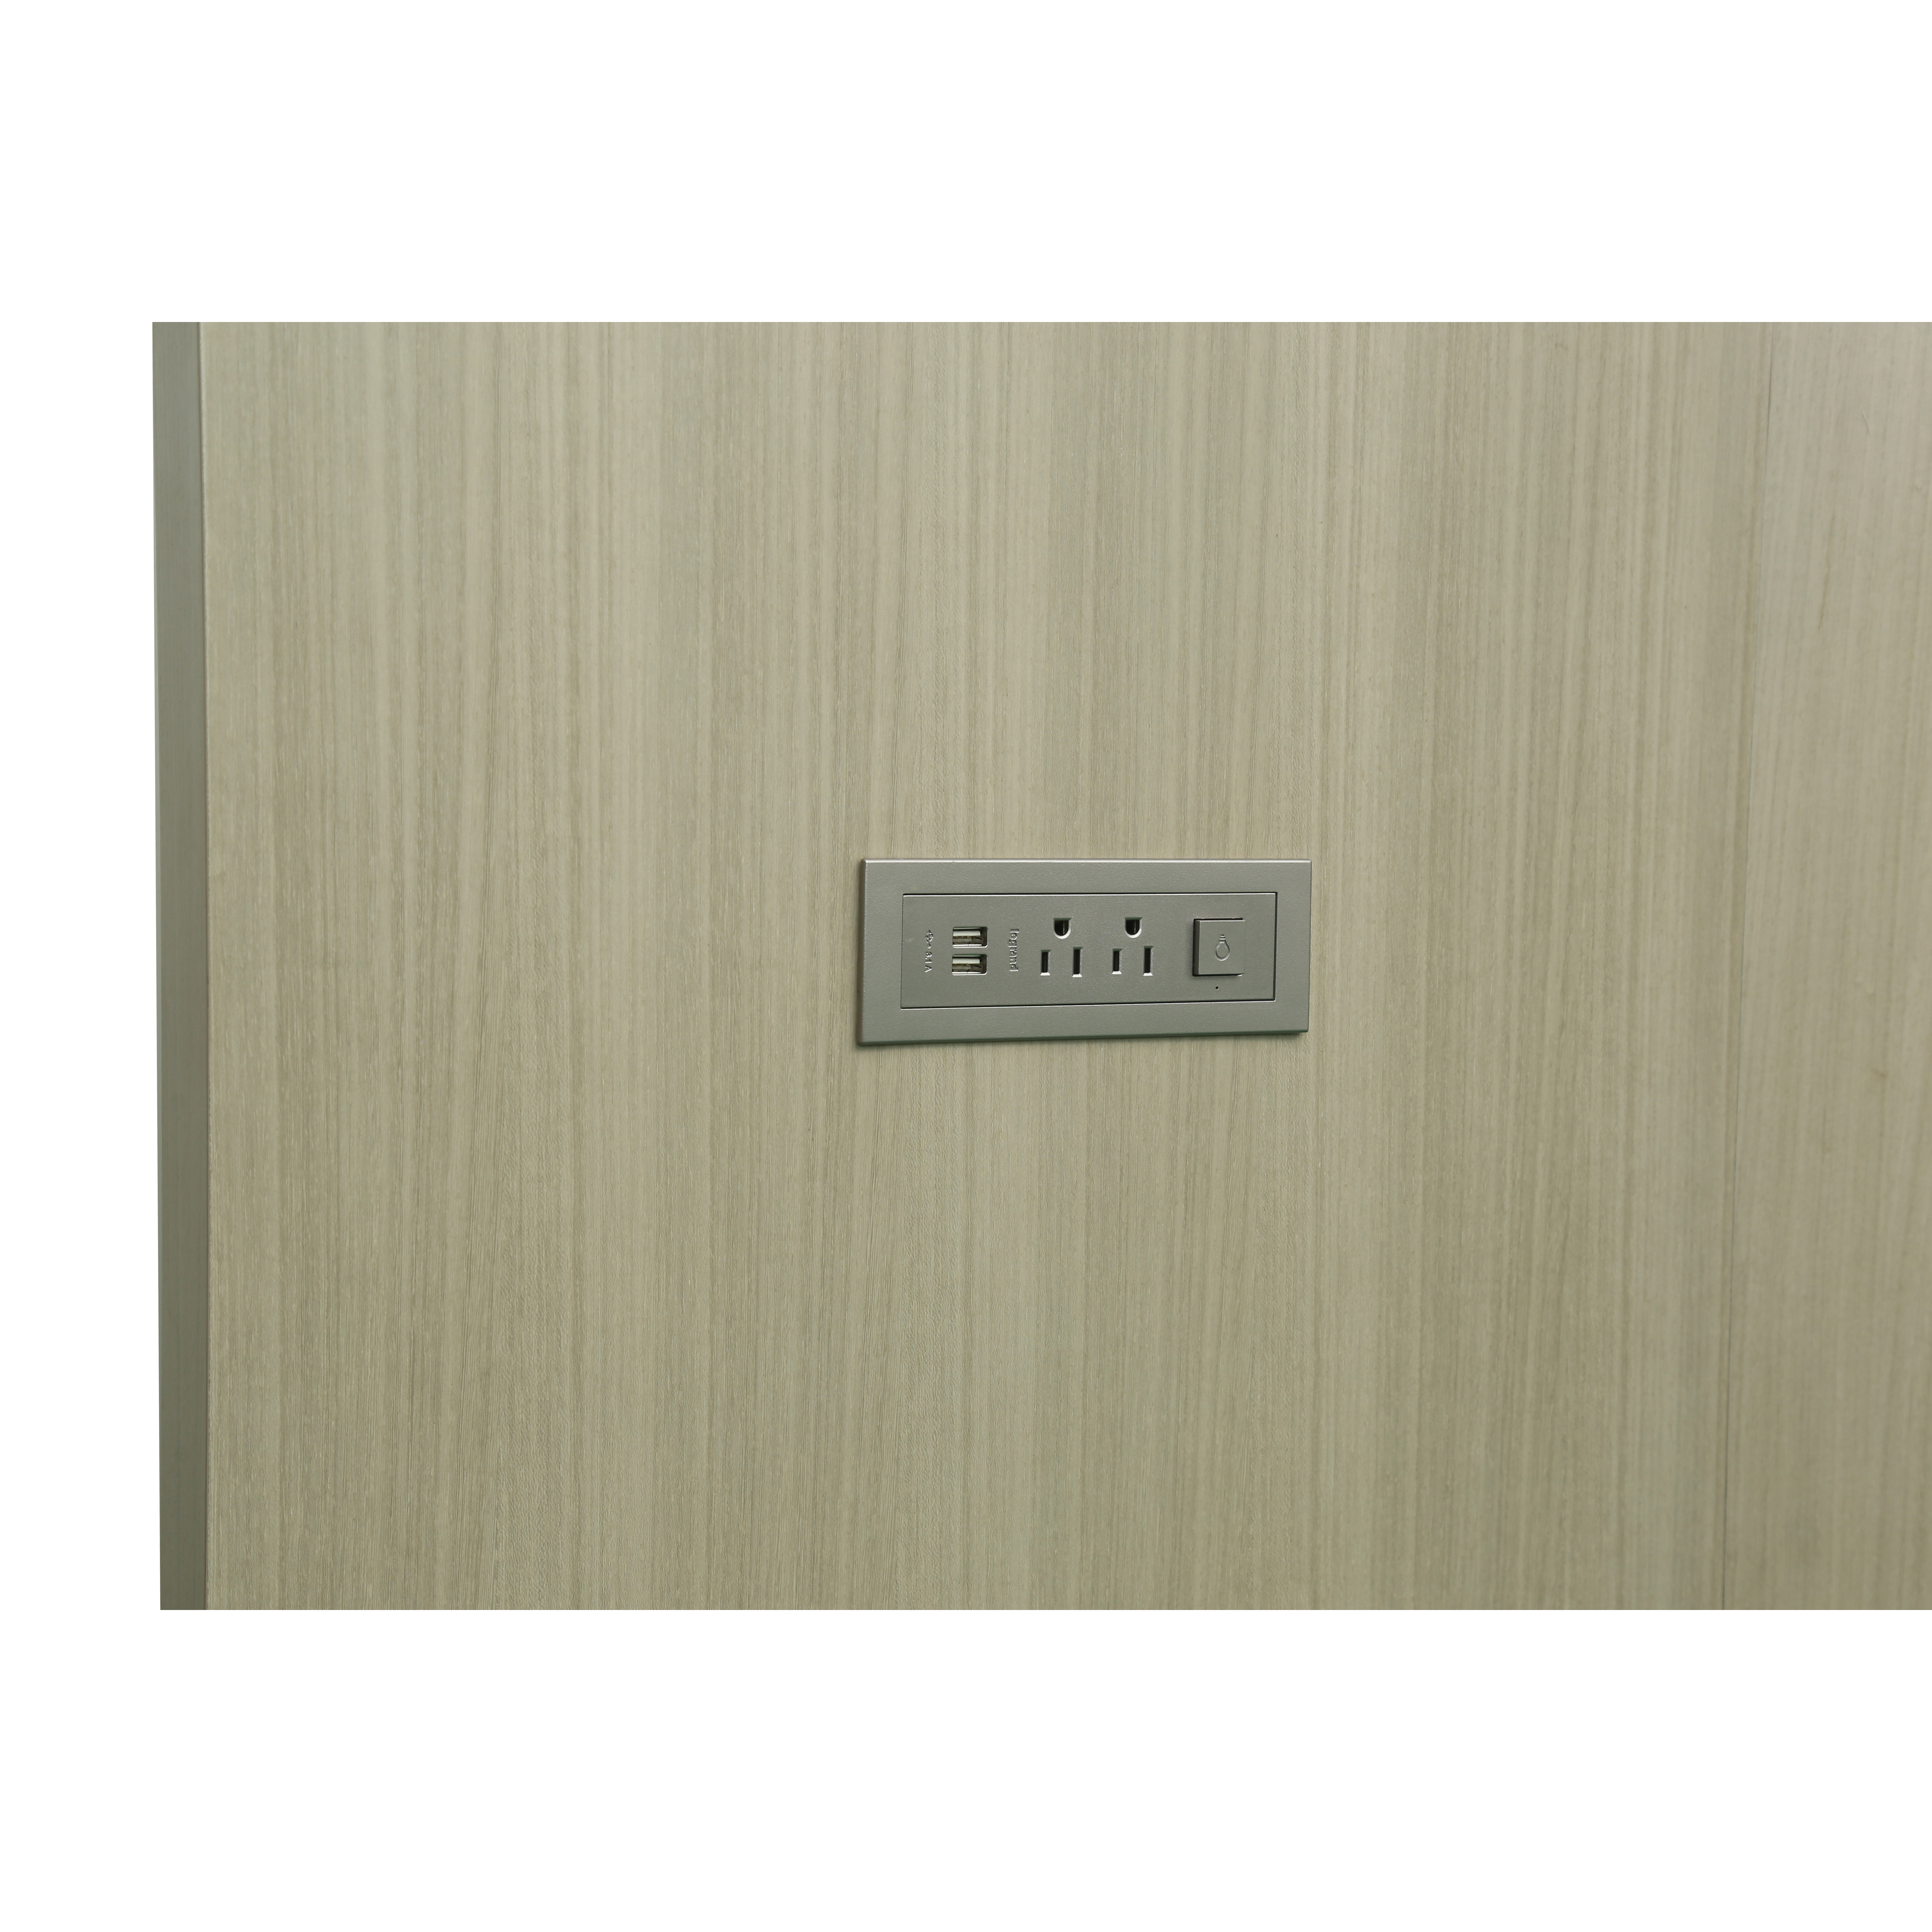 wall plate covers wholesale, wall panel supplier, bespoke wall panelling, wpc wall panel manufacturer, luxury wall panel design